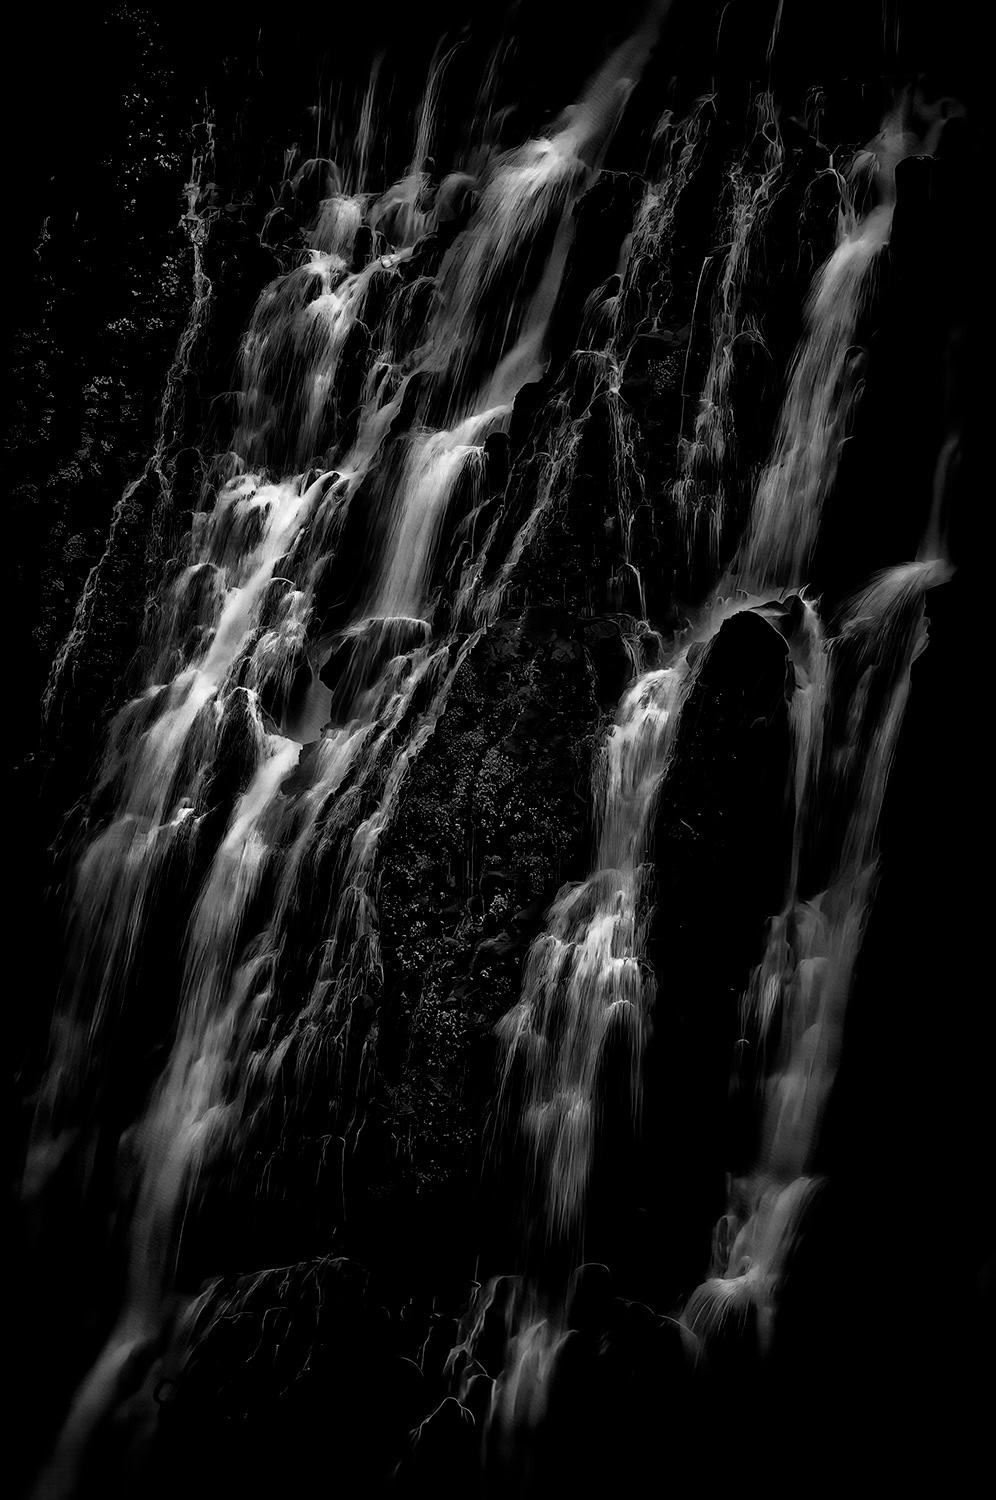 A black and white close up photograph of Burney Falls